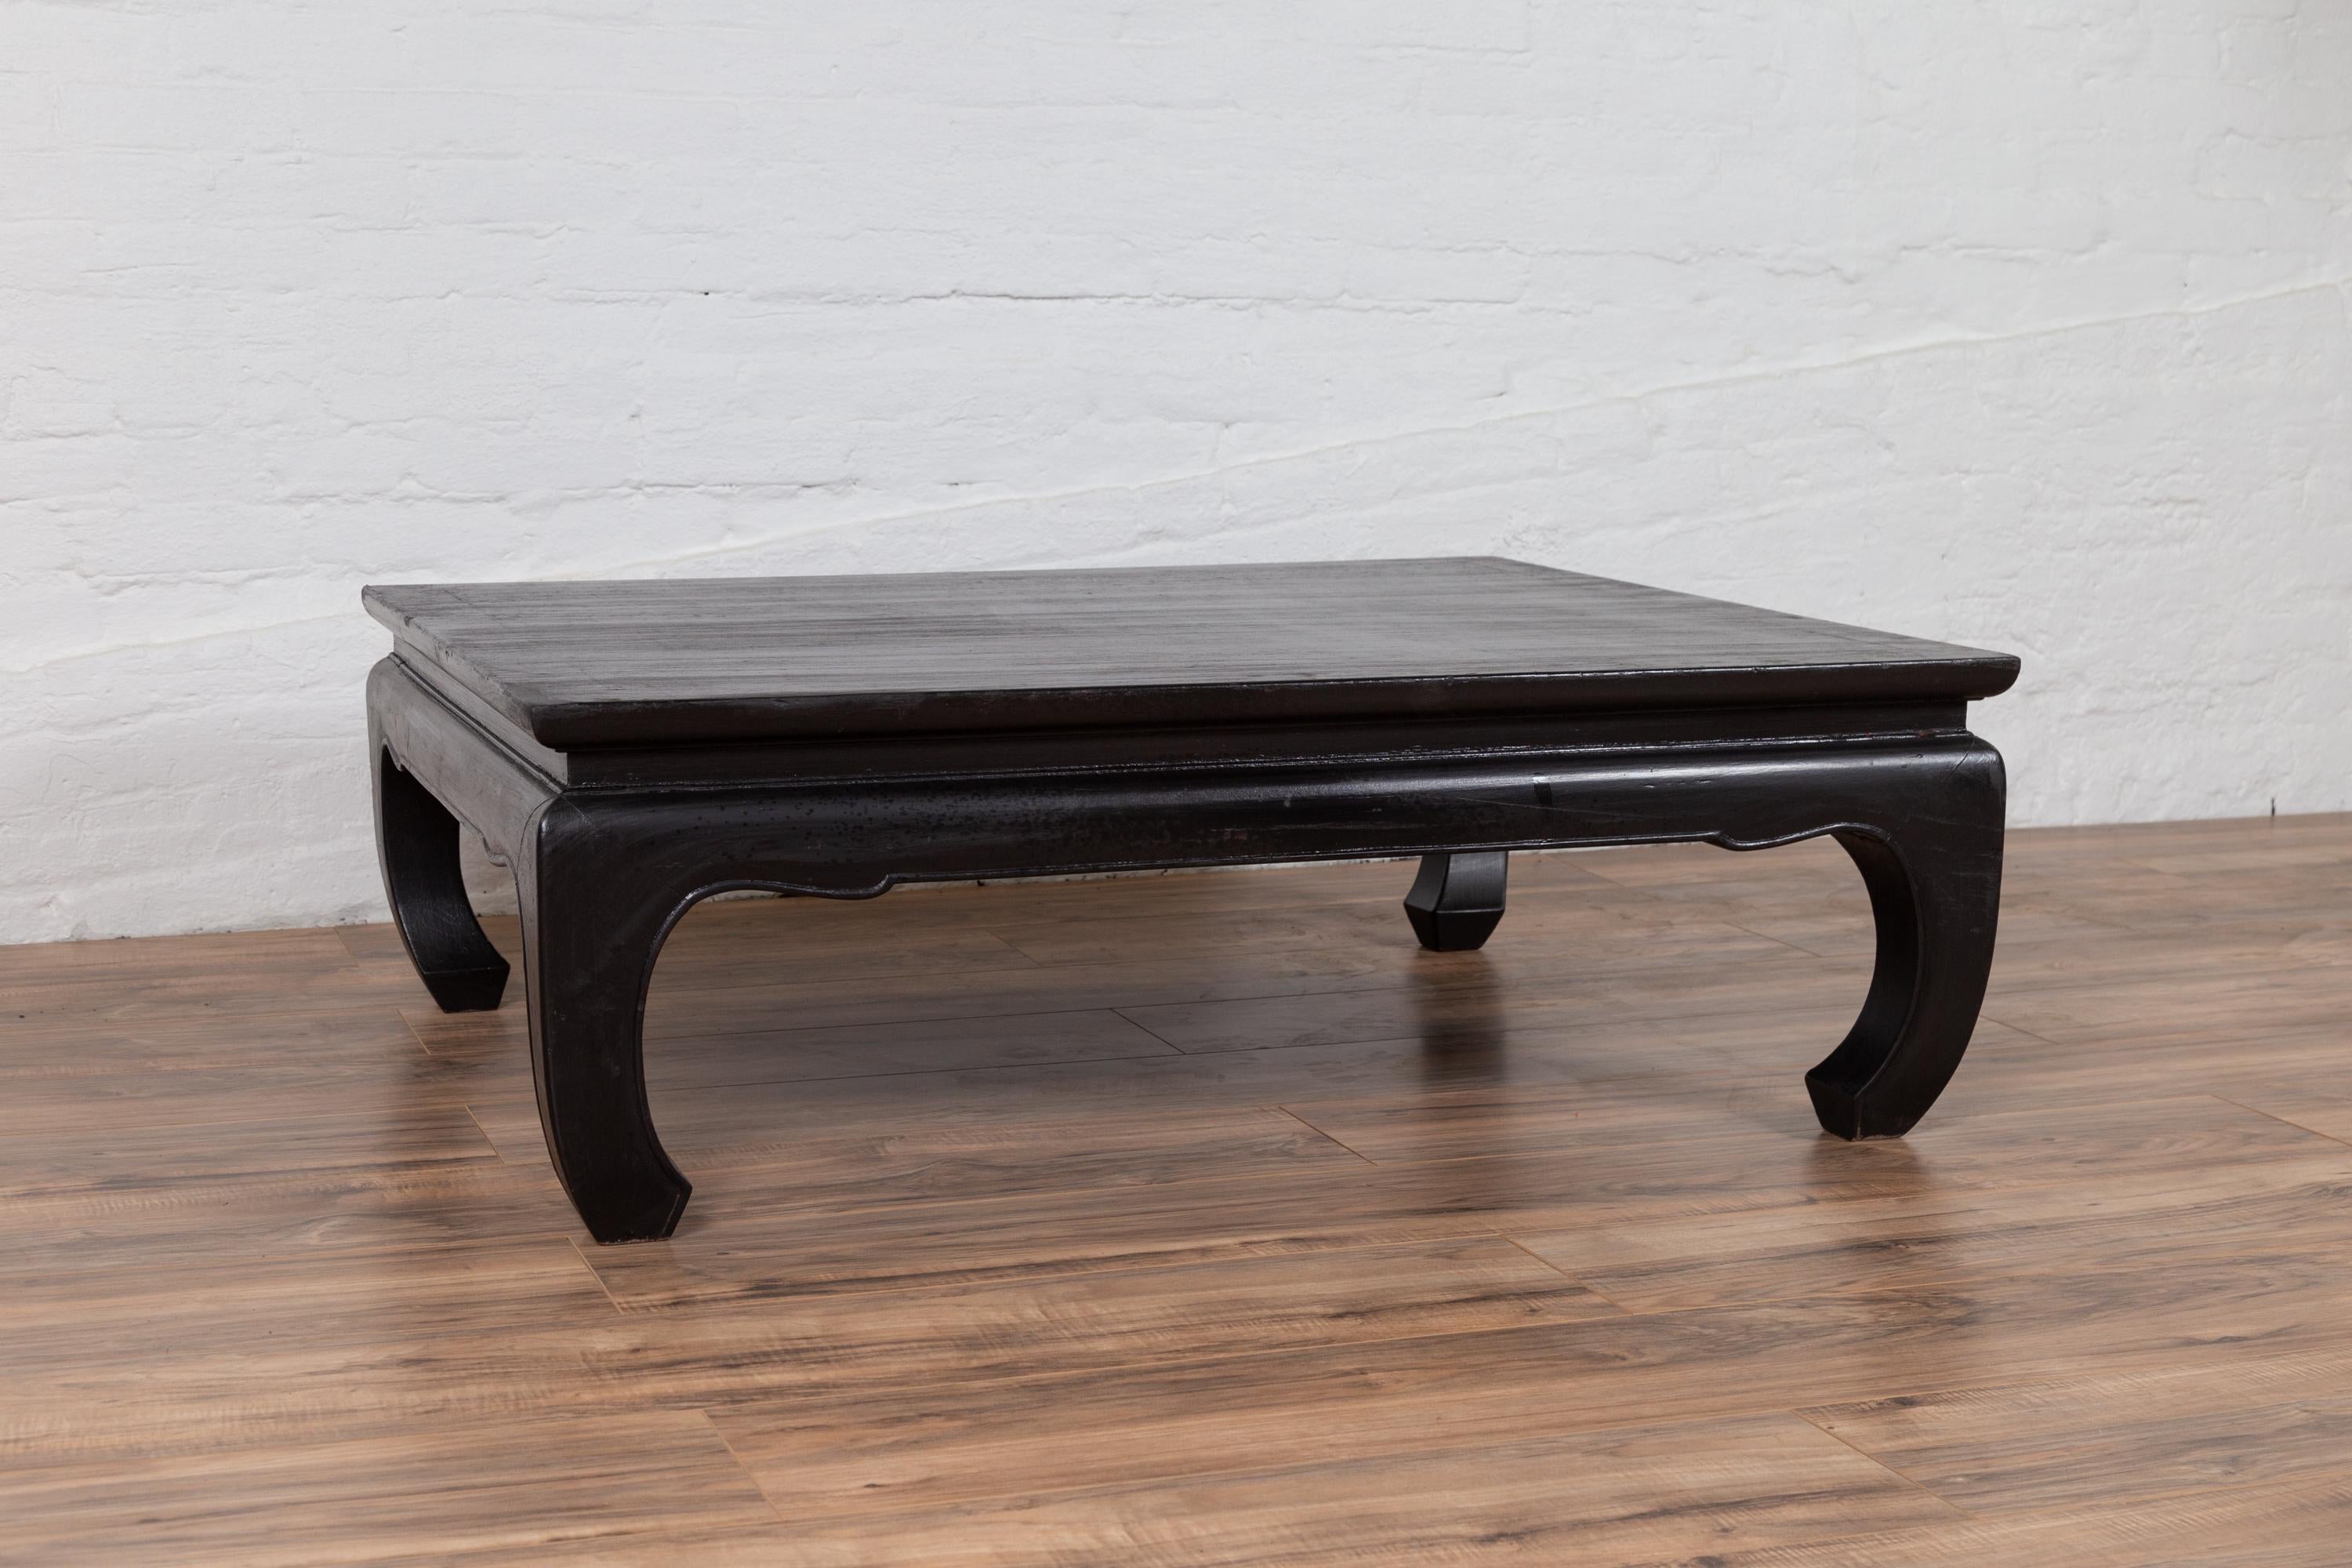 Lacquered Thai Teak Vintage Coffee Table with Black Lacquer and Chow Legs and Horsehoof